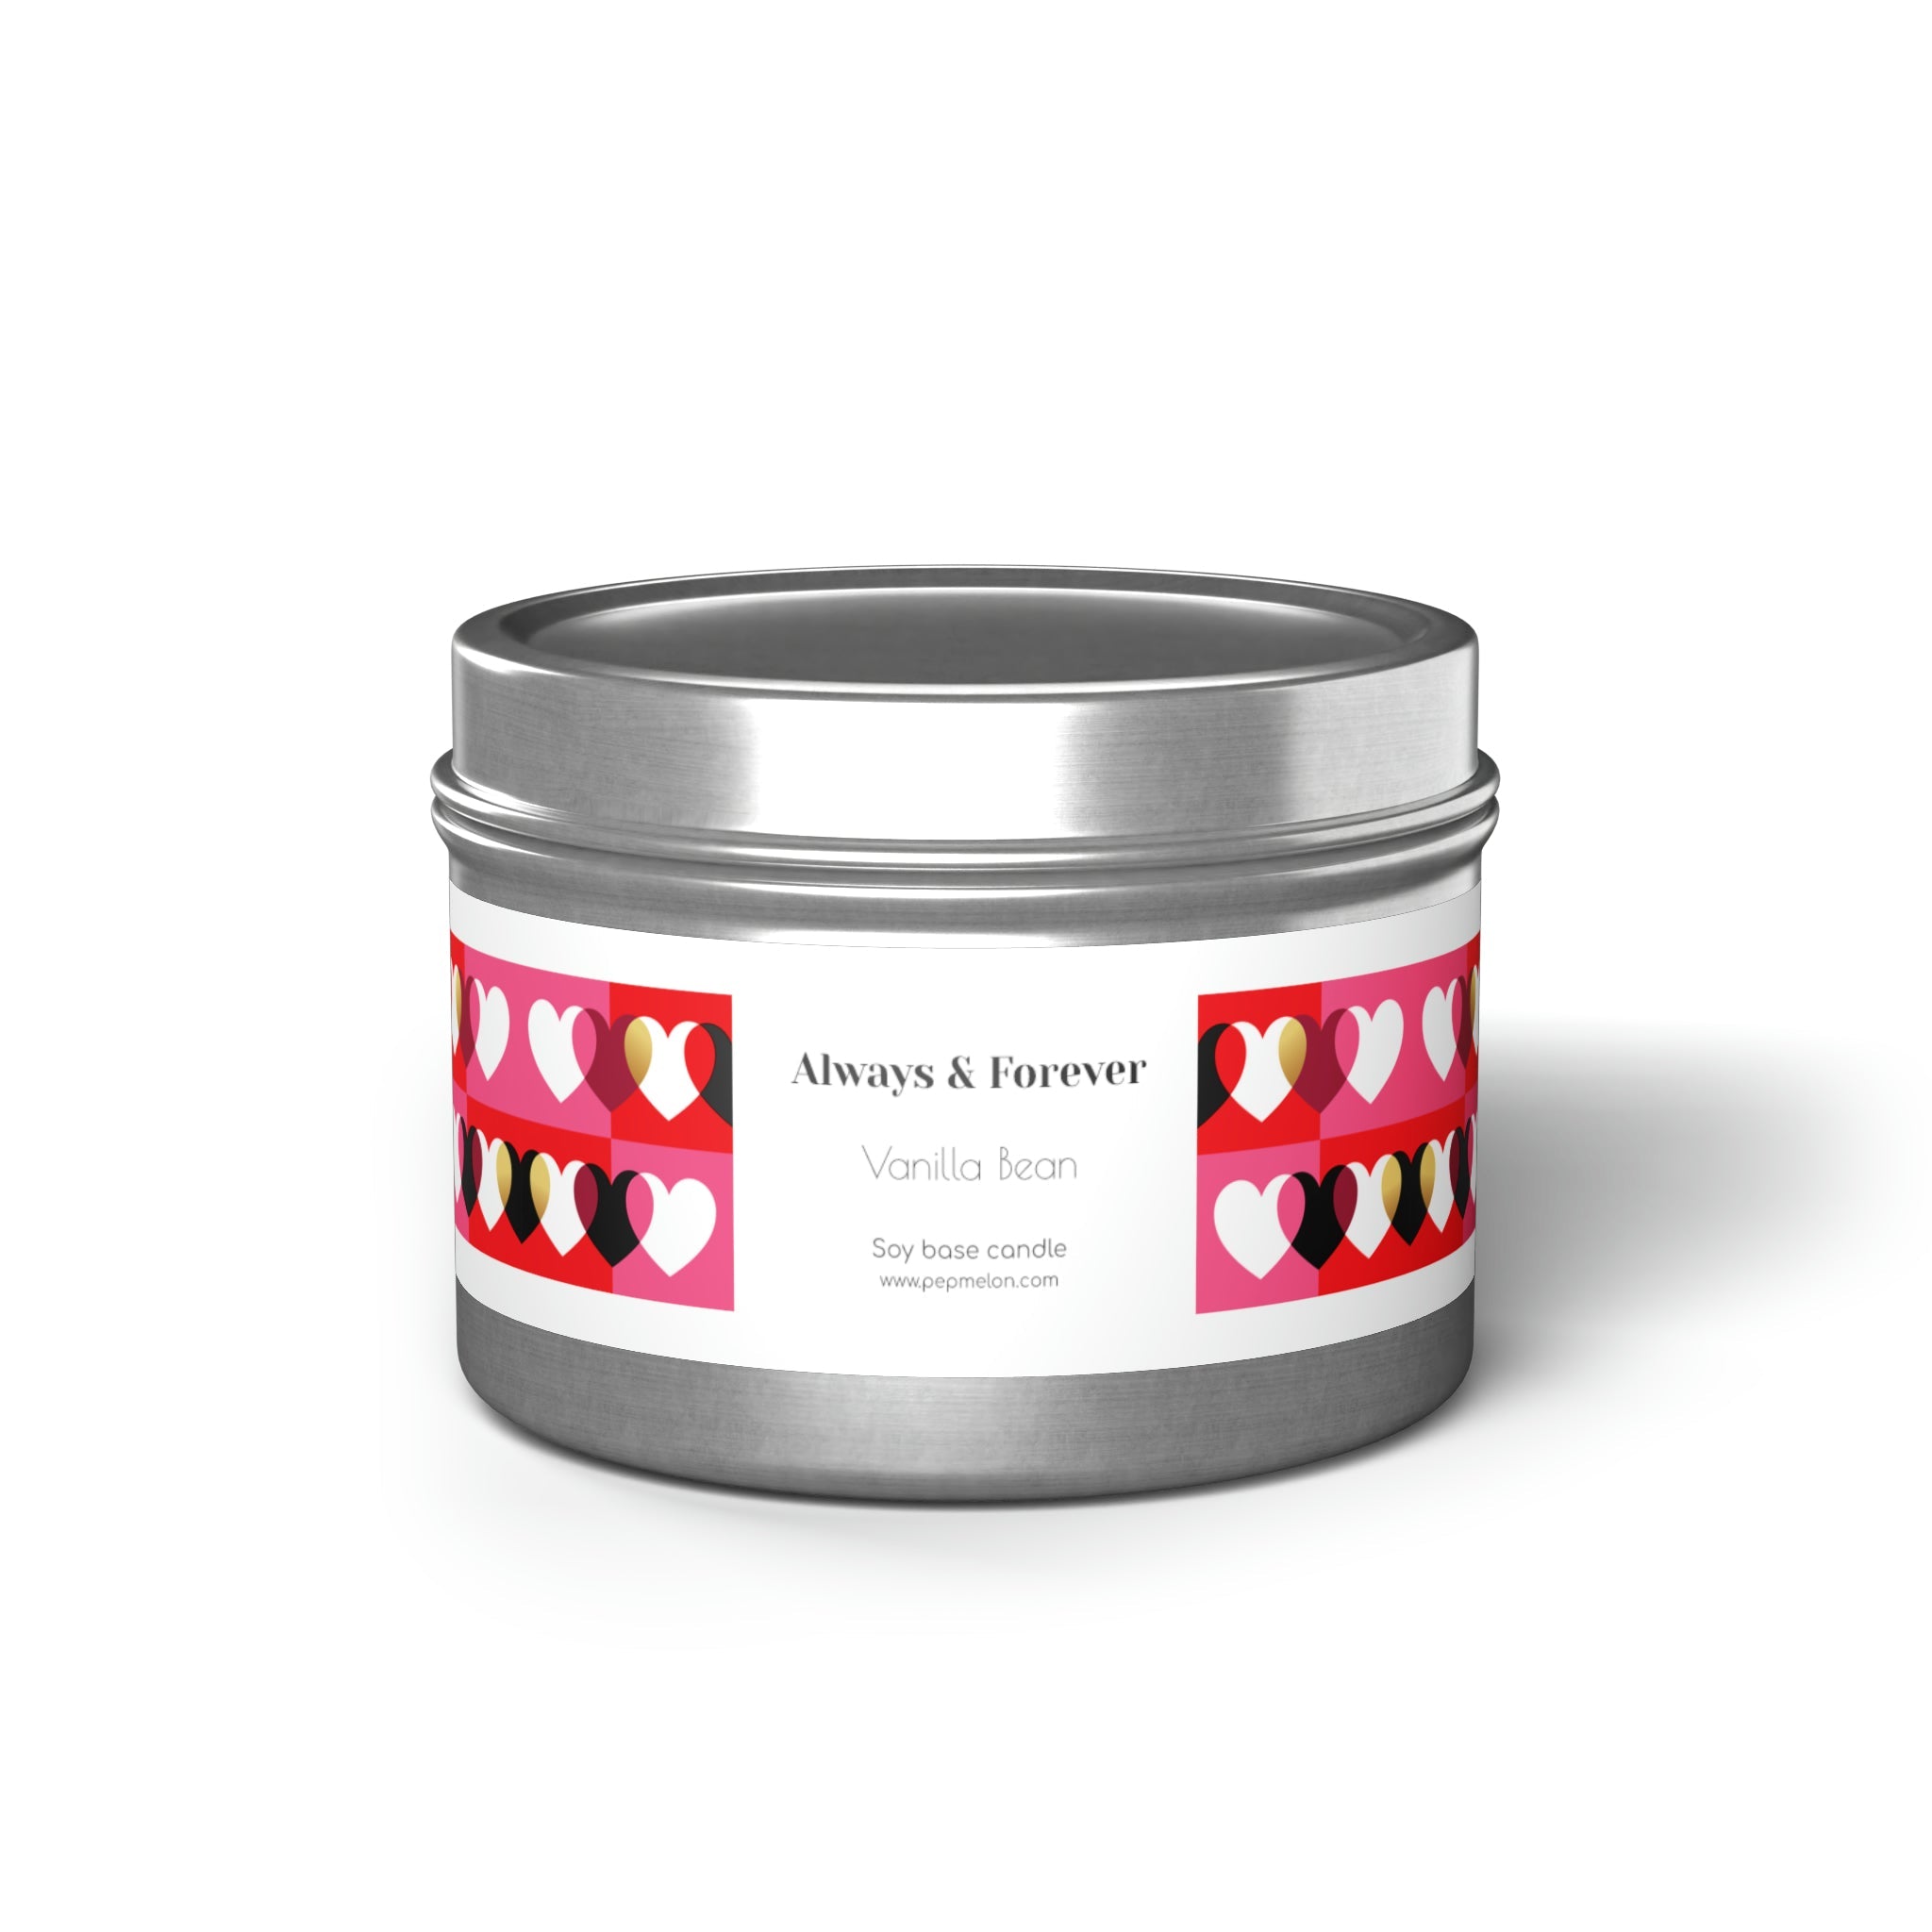 Vanilla Bean Always & Forever Soy base candle love, valentine's day gift Tin Candles-0